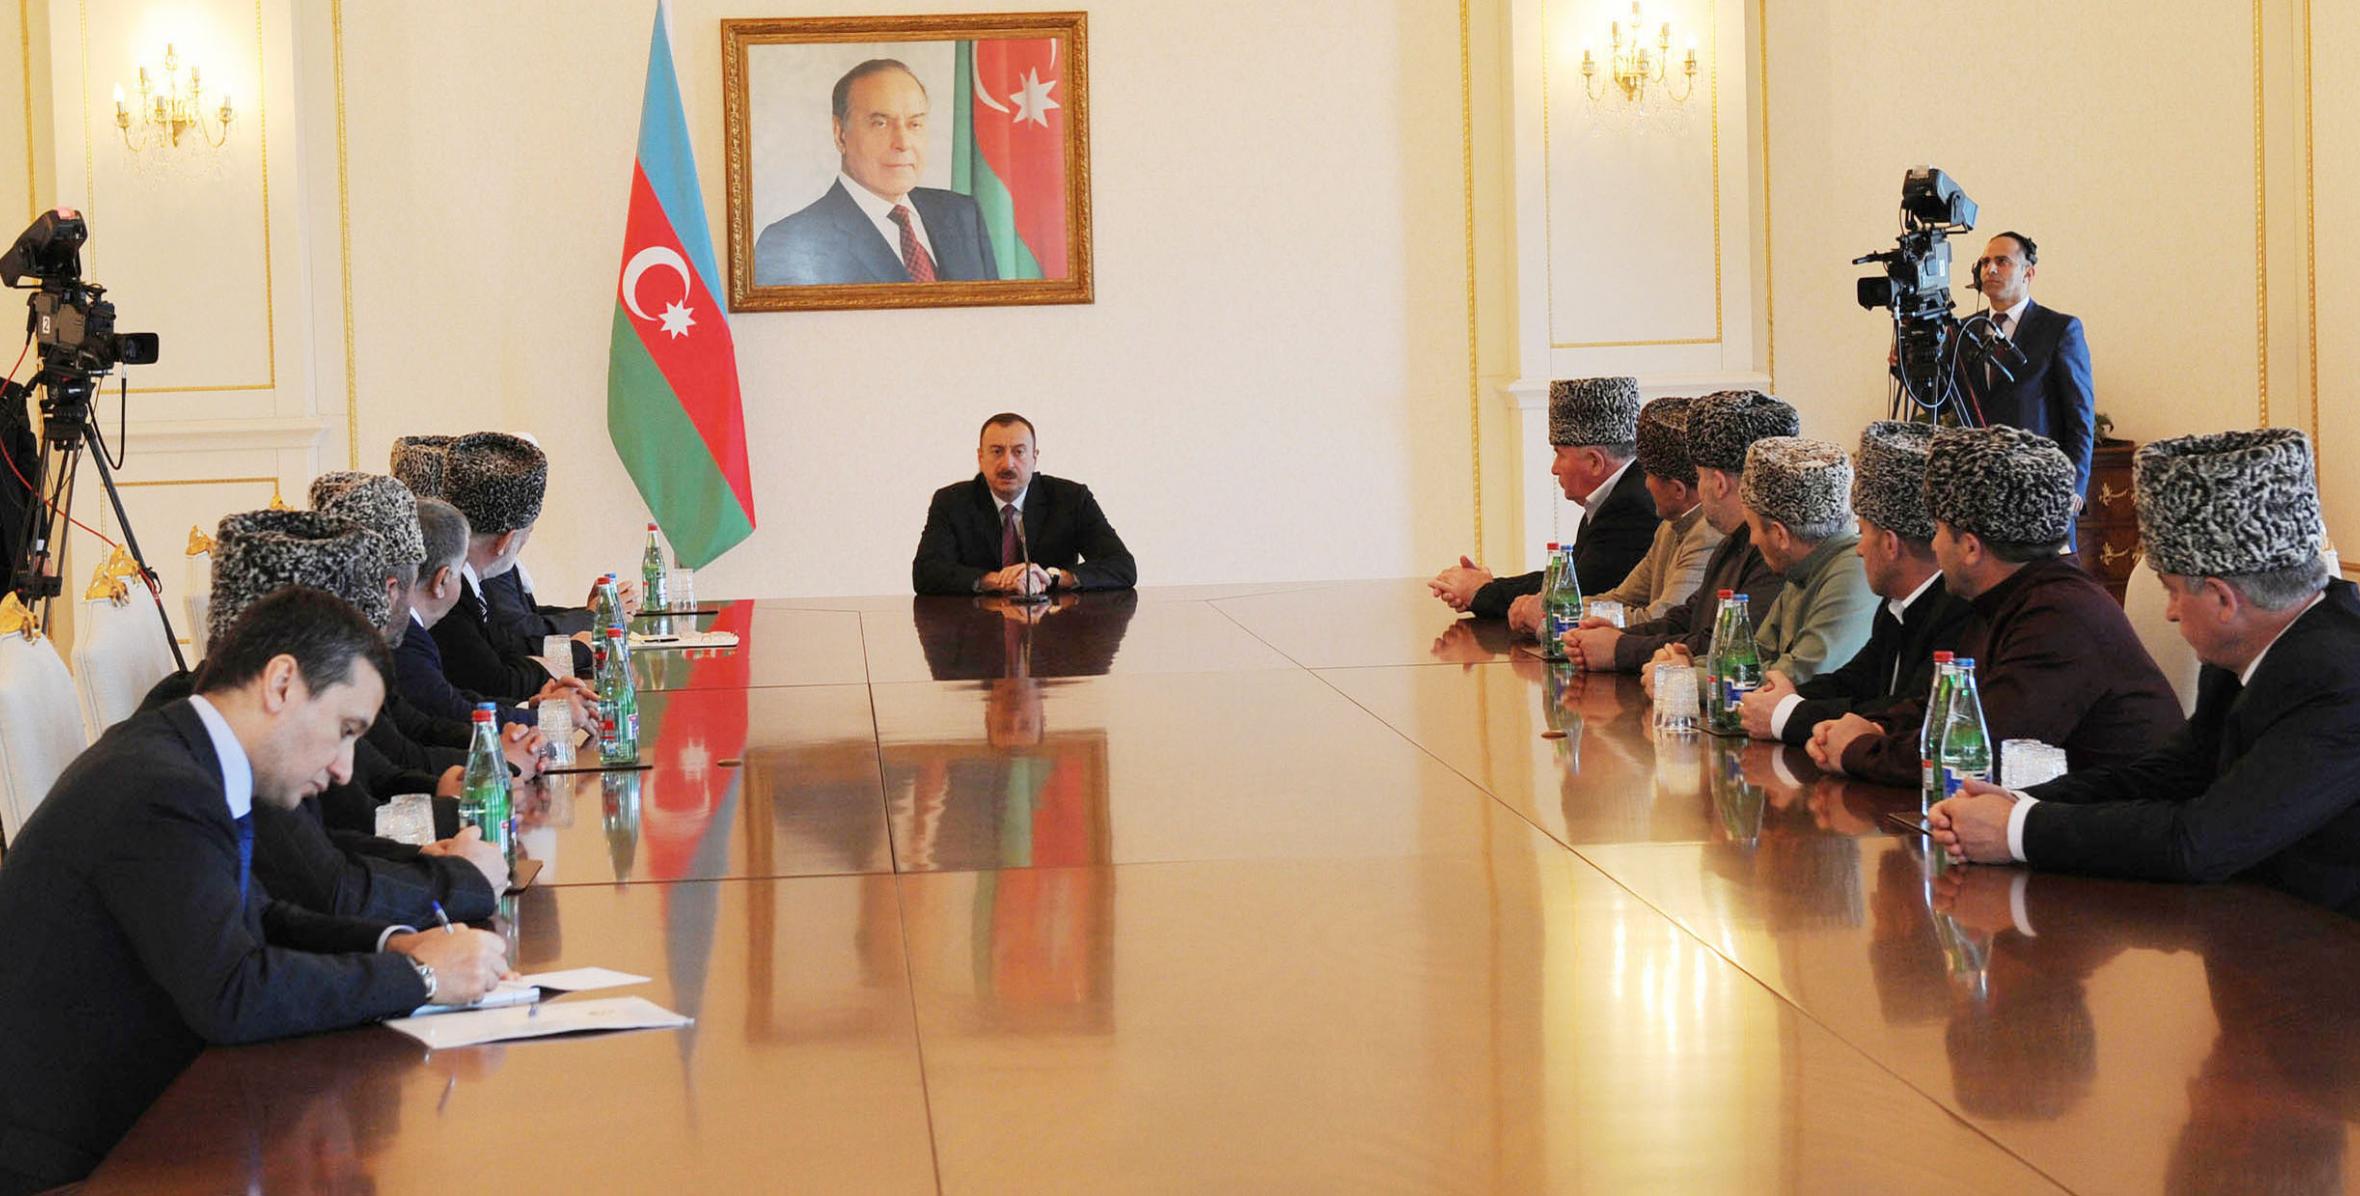 Ilham Aliyev gave audience to participants of reporting conference of the Supreme Religious Council of Caucasian Peoples held in Baku